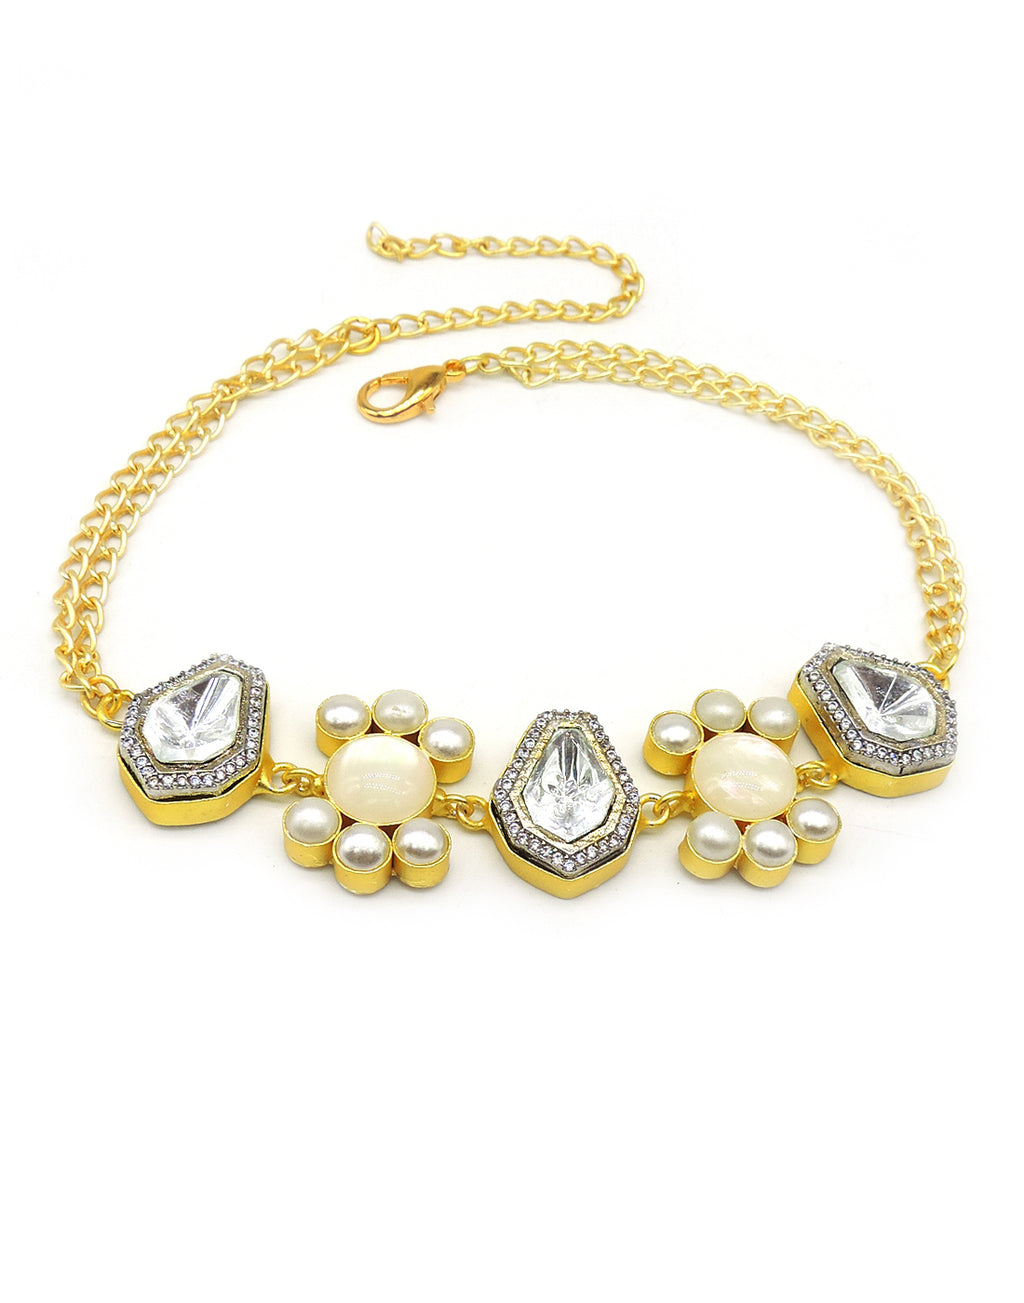 Flower & Crystal Necklace - Statement Necklaces - Gold-Plated & Hypoallergenic Jewellery - Made in India - Dubai Jewellery - Dori